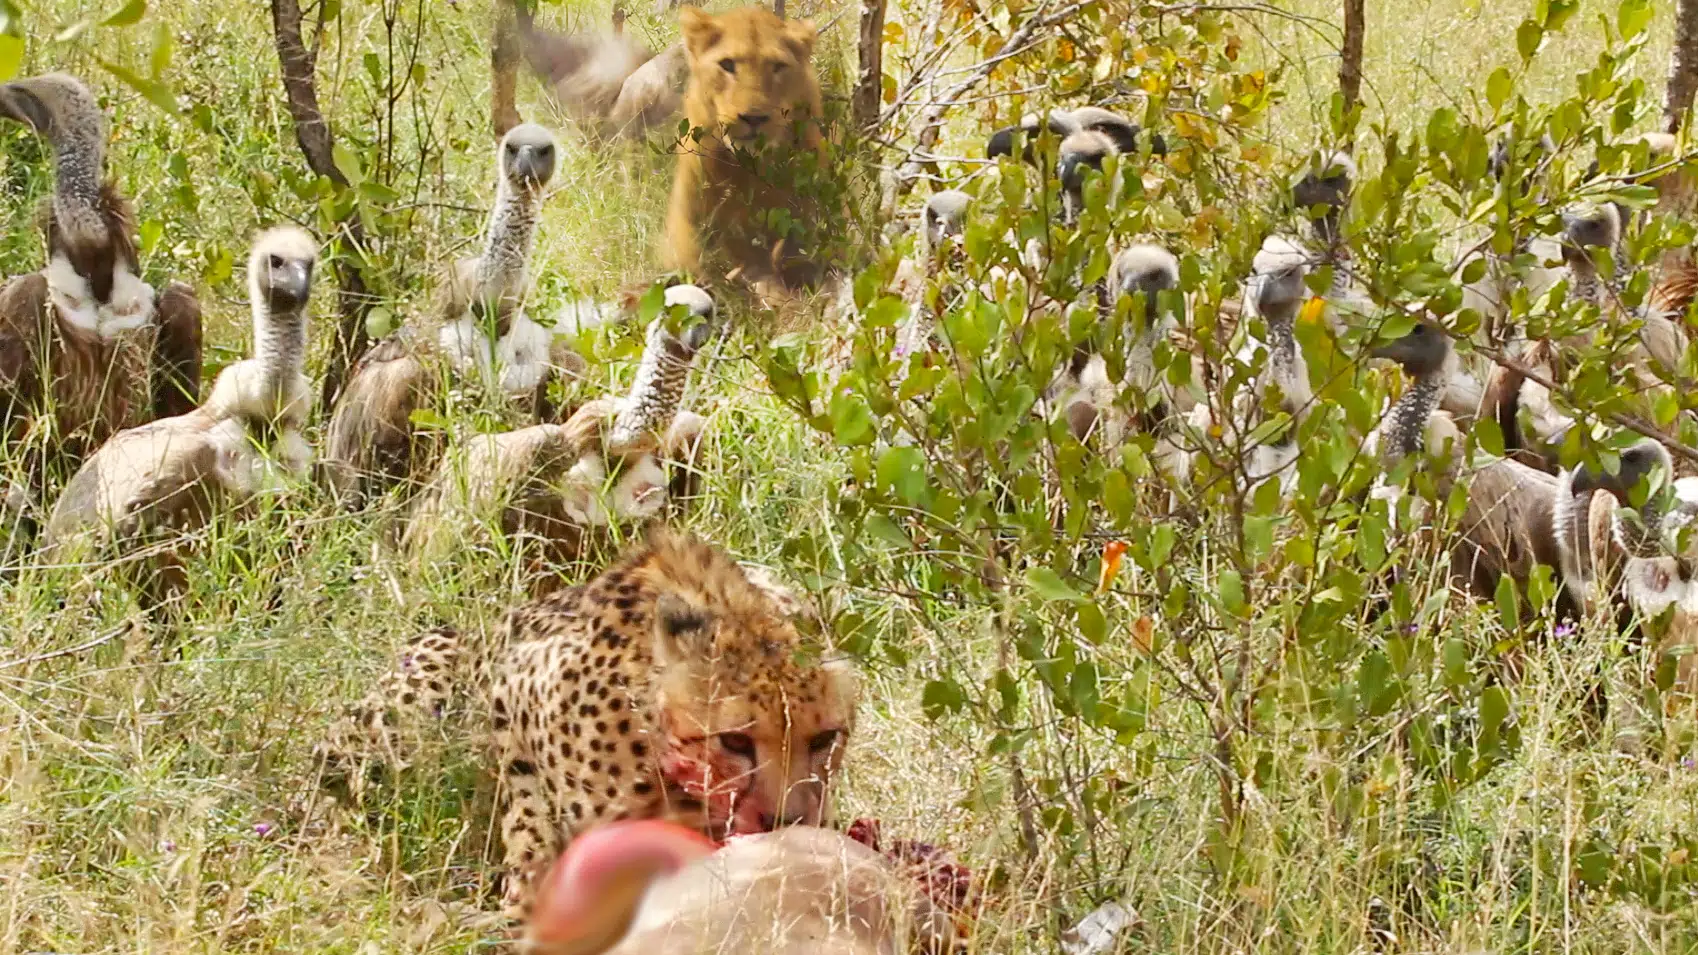 Lion Steals from Vultures that Stole from Cheetah